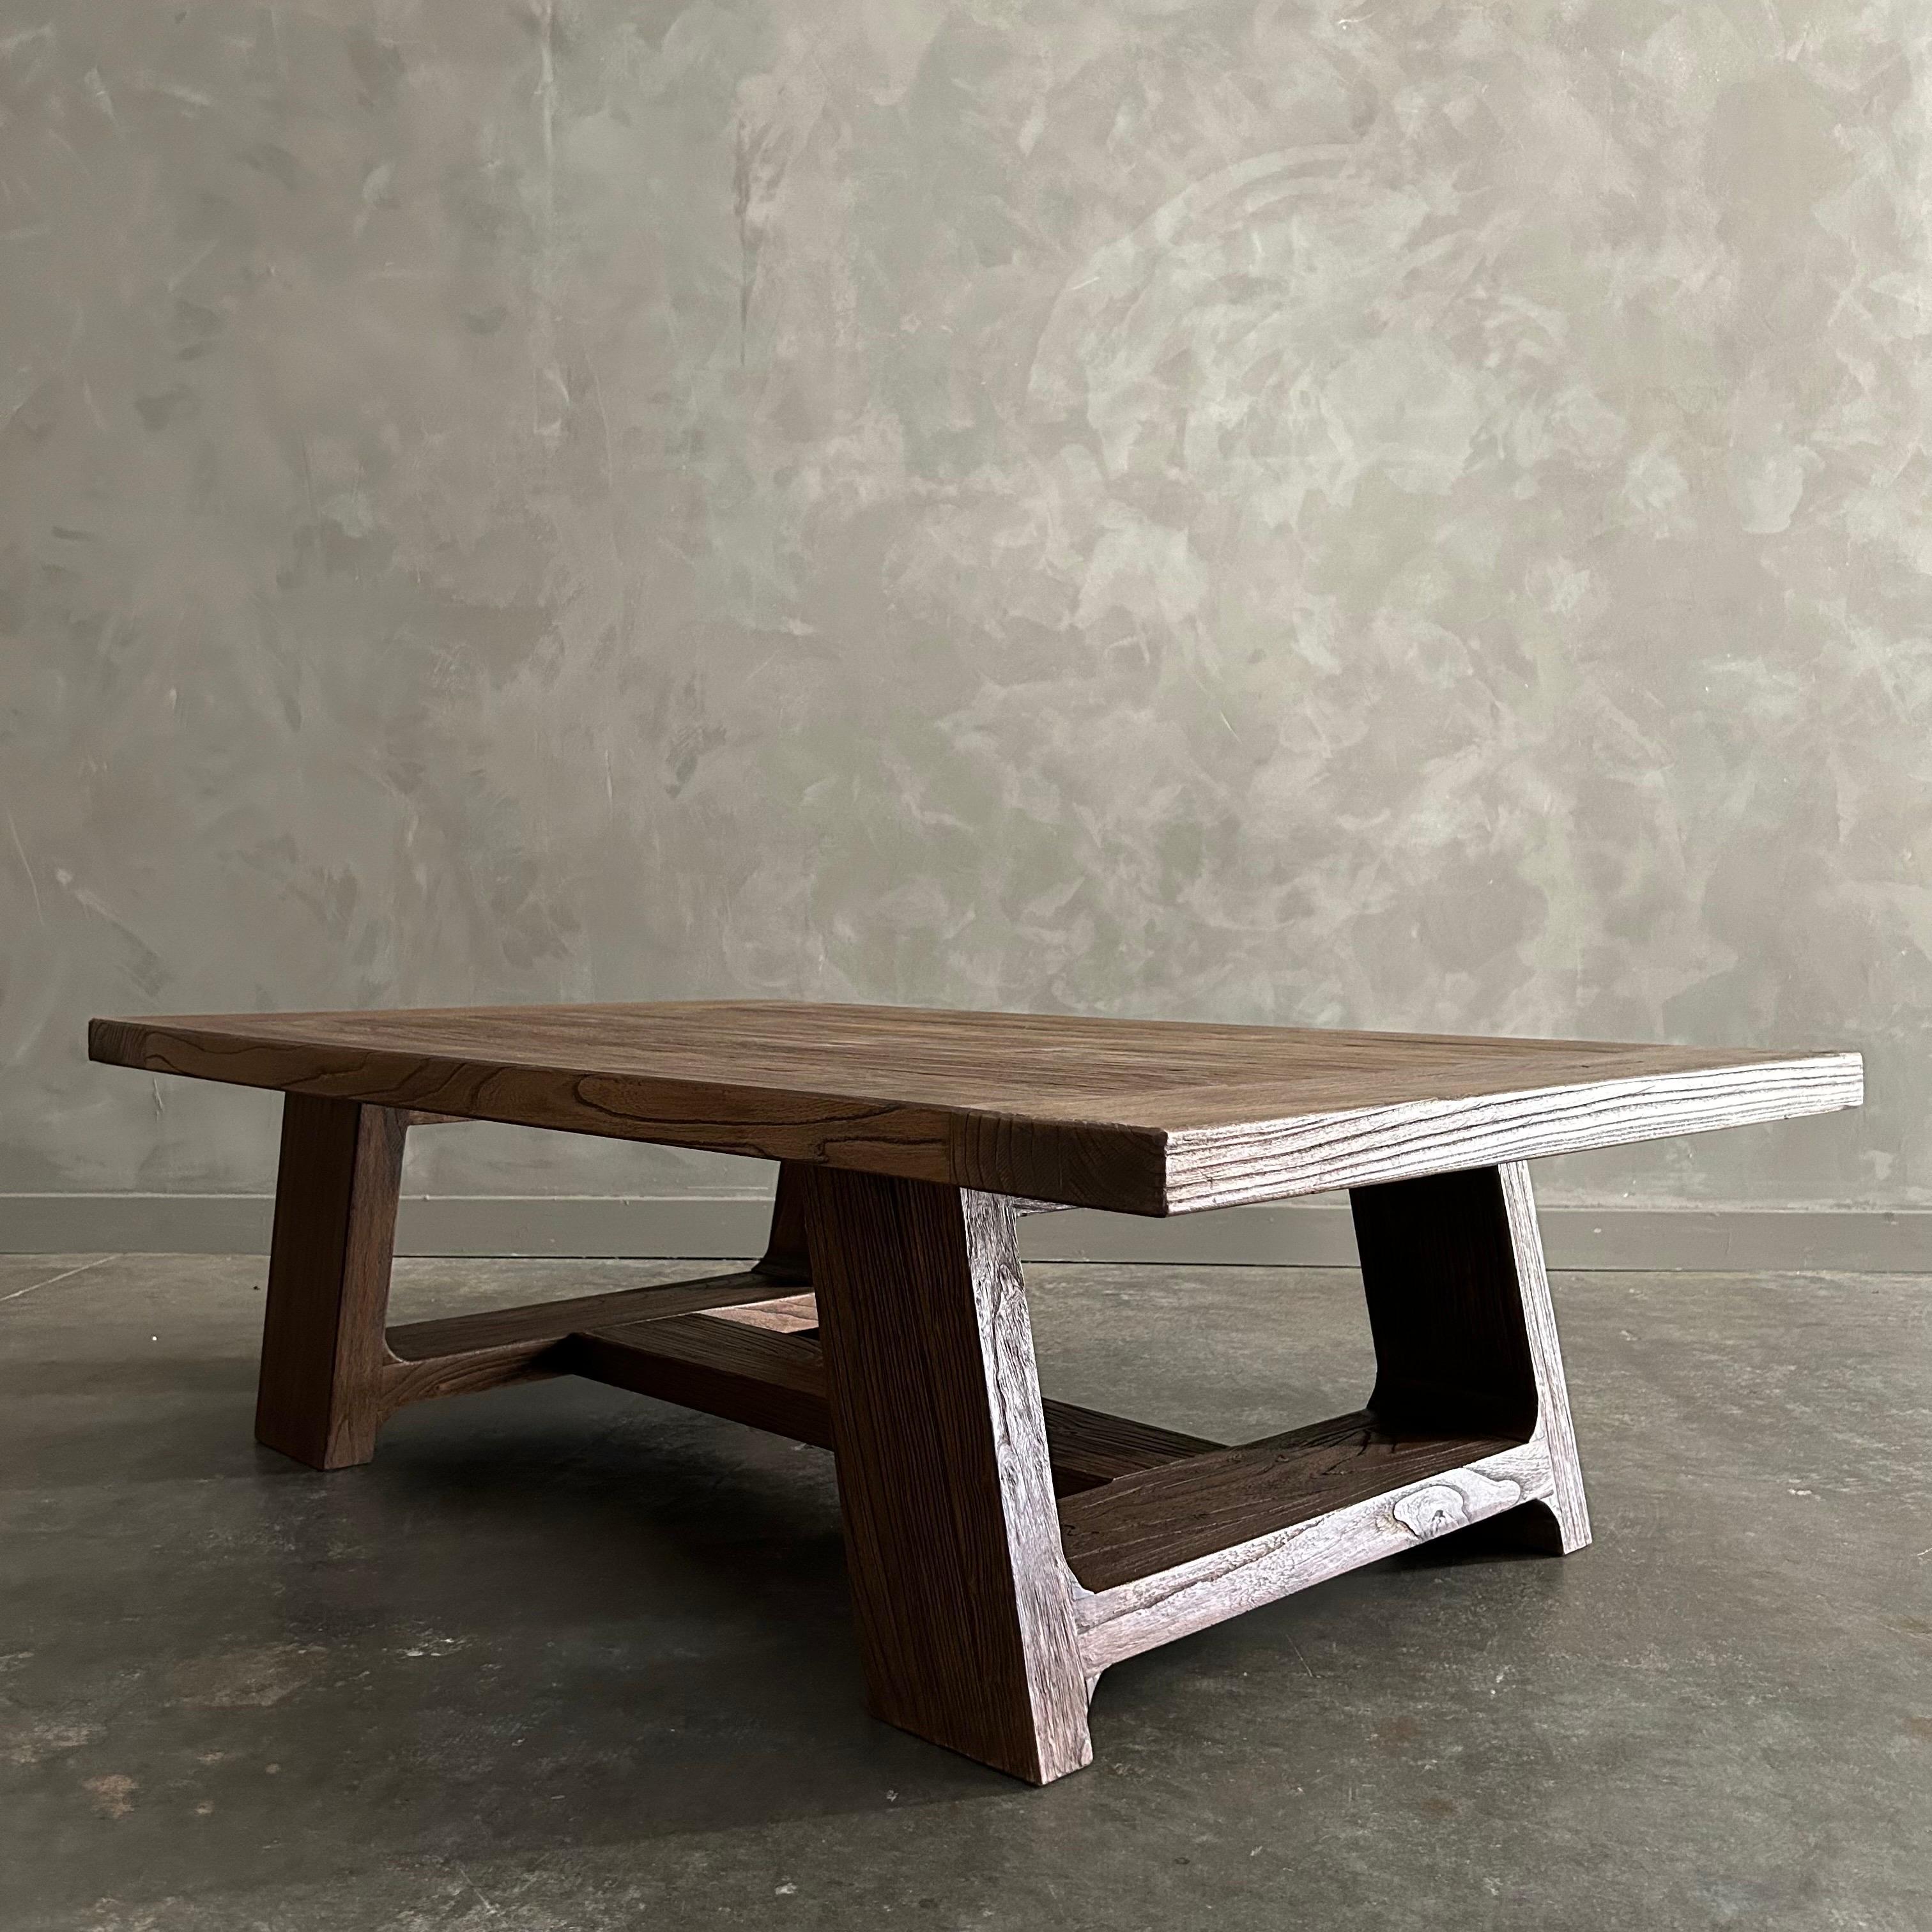 Versa Elm Wood Coffee Table in Walnut Finish
These old elm timbers show in its most primal, natural form. The artisanal construction methods highlight the elm woods beautiful grain pattern & knots and fissures from its past life. The most authentic